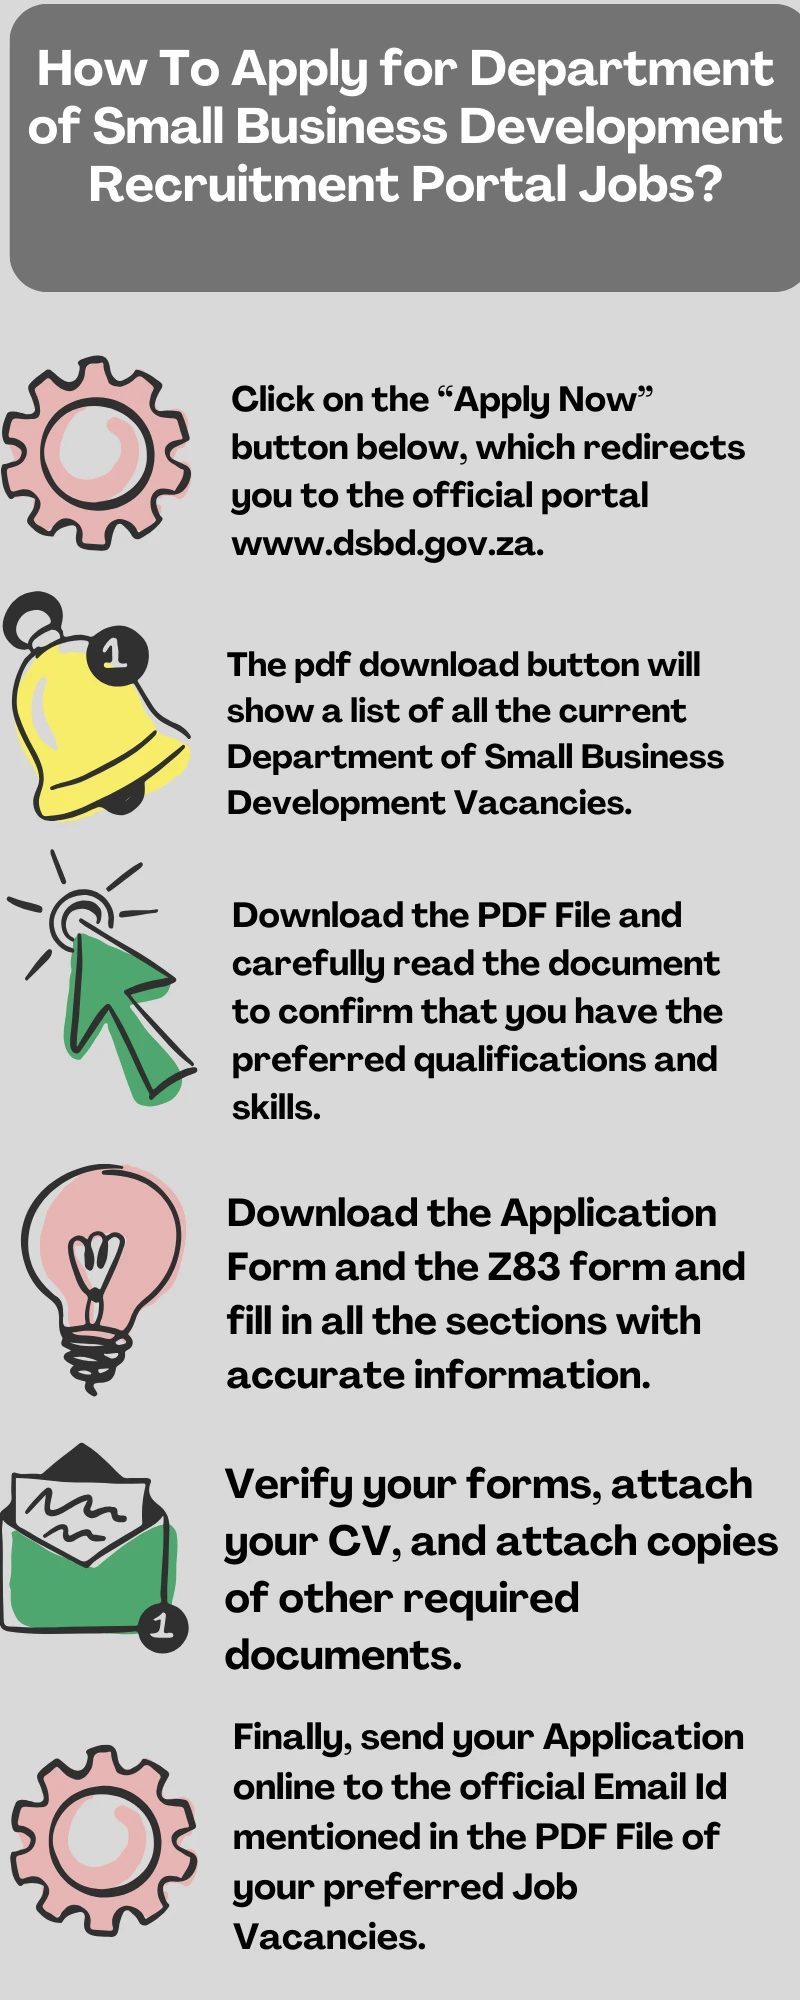 How To Apply for Department of Small Business Development Recruitment Portal Jobs?